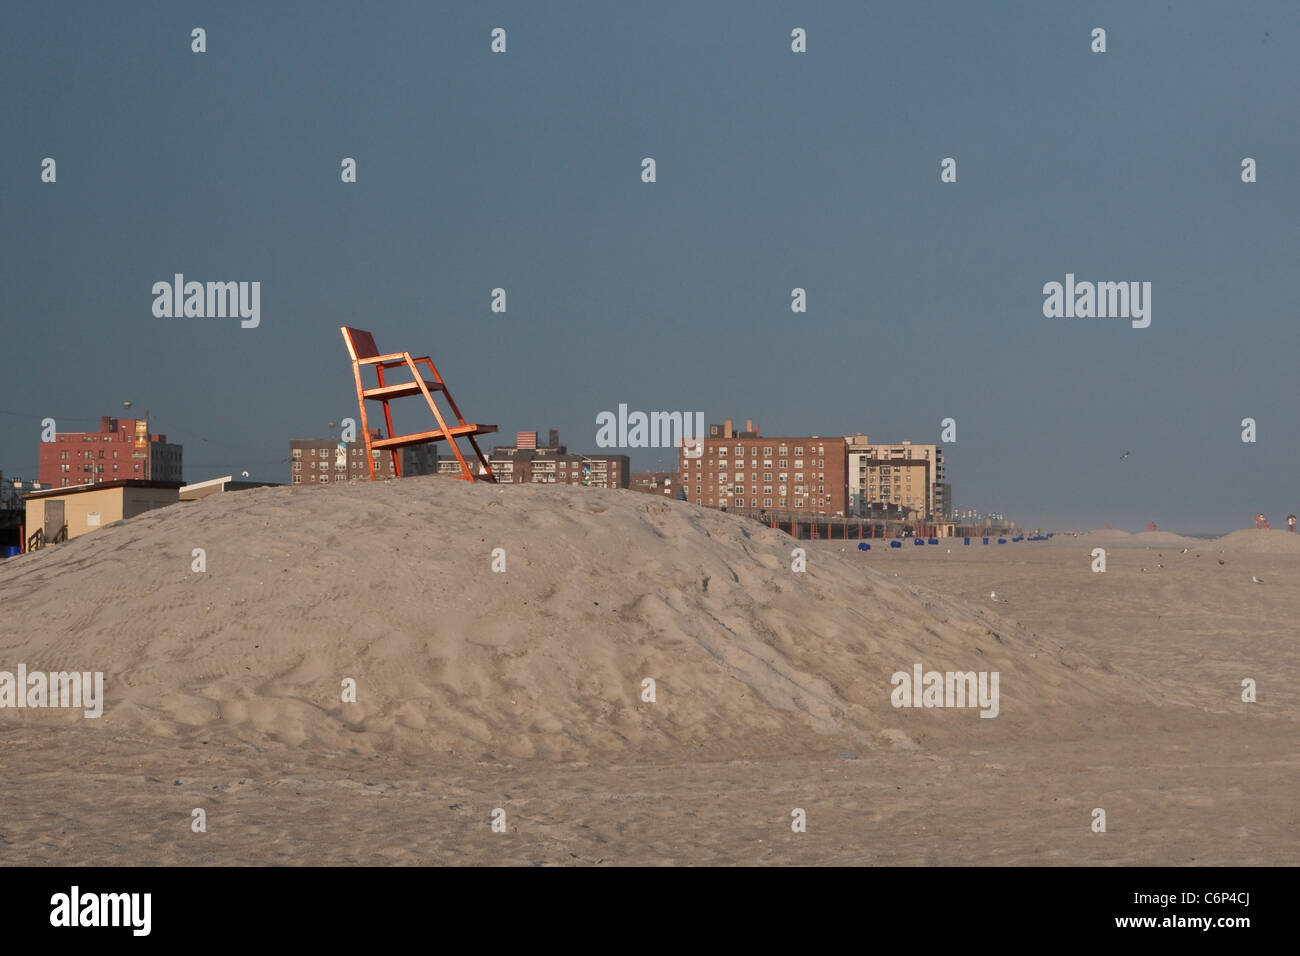 An empty lifeguard chair is pictured in Long Beach, NY, Monday August 1, 2011. Long Beach is a city in Nassau County, New York. Stock Photo